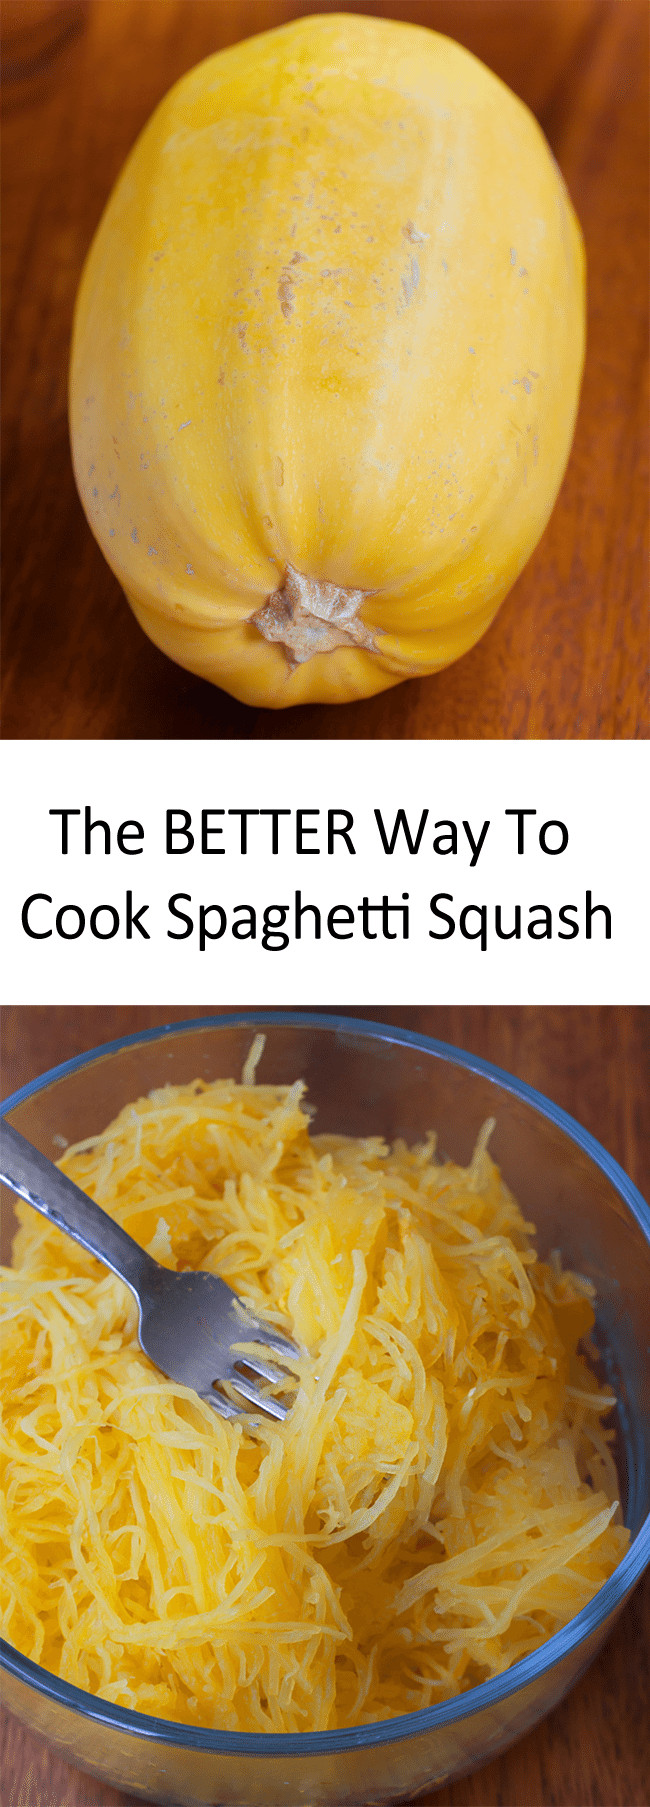 Cook Spaghetti In Microwave
 How To Cook Spaghetti Squash